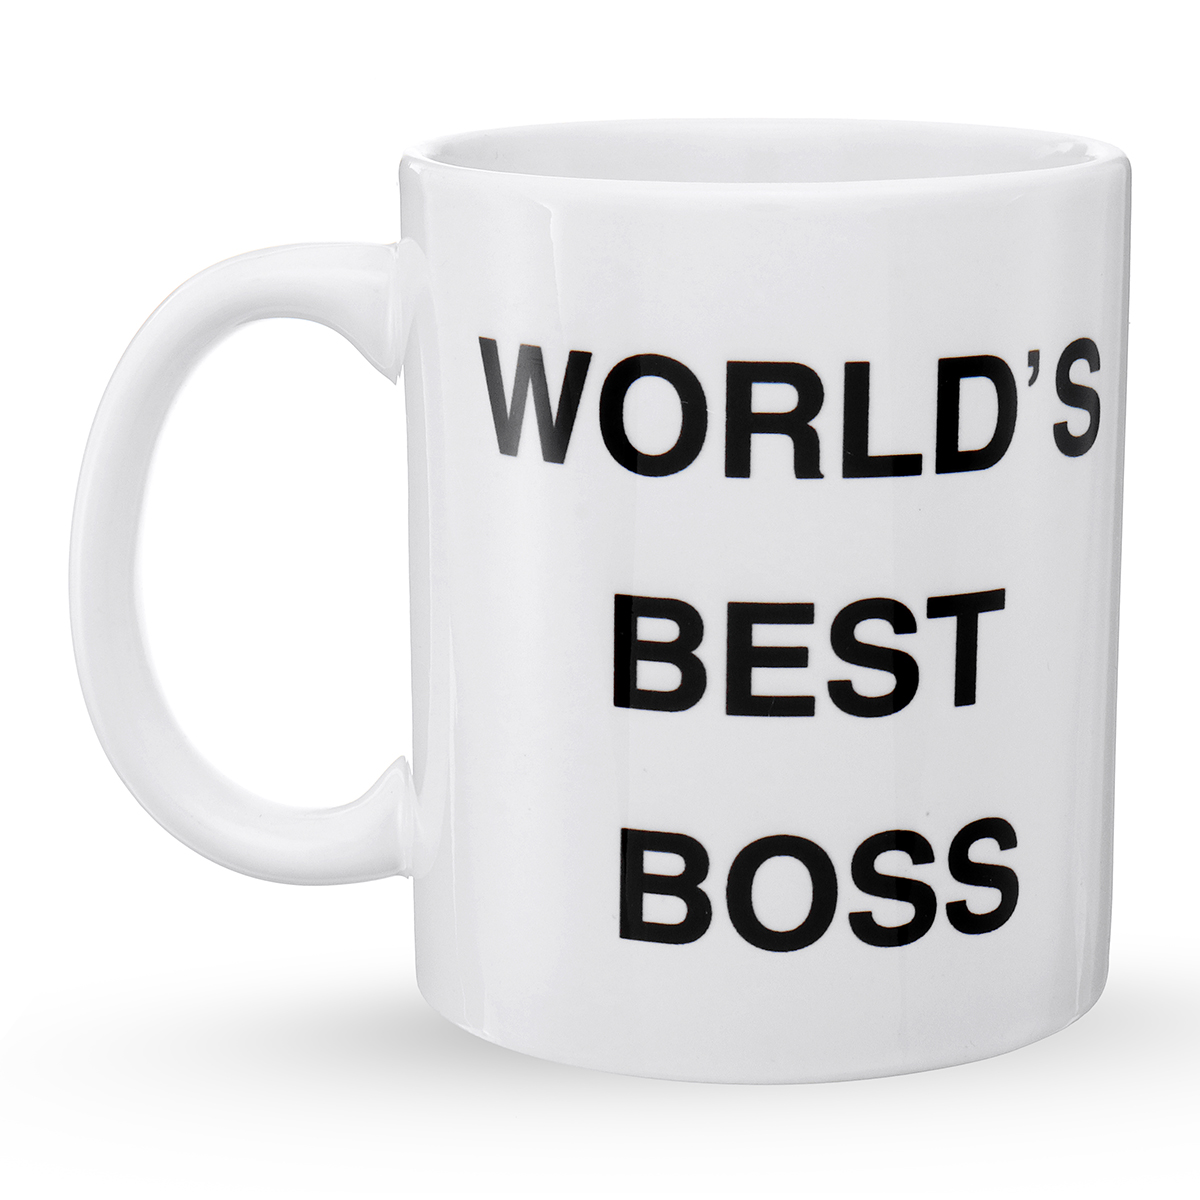 

WORLD'S BEST BOSS" Cup Funny Coffee Mug Mugs Cup Gift Present Office Coffee Soup Tea Cup Gift